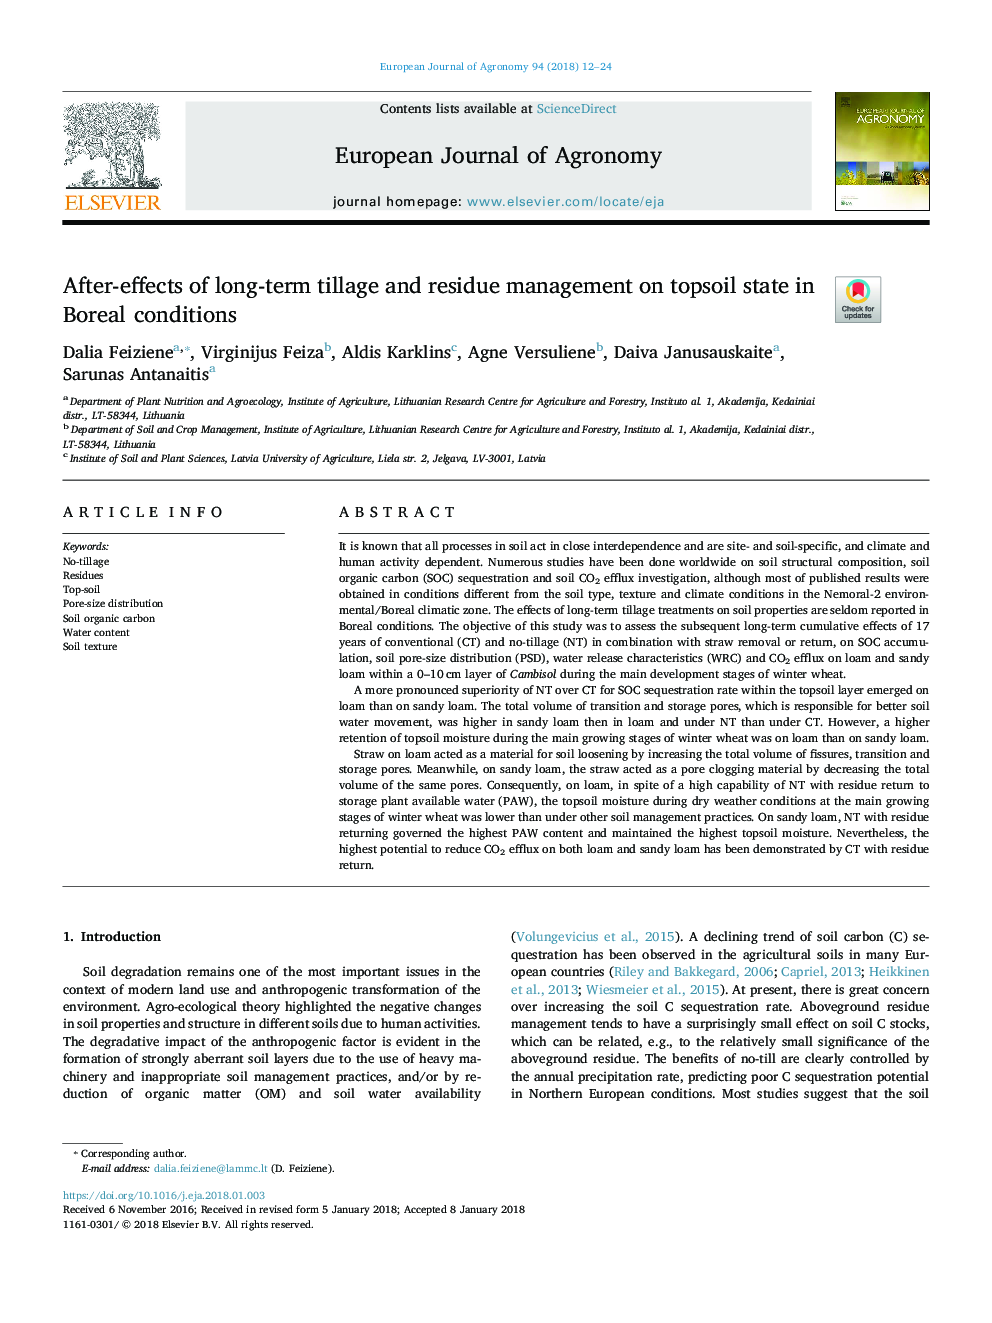 After-effects of long-term tillage and residue management on topsoil state in Boreal conditions